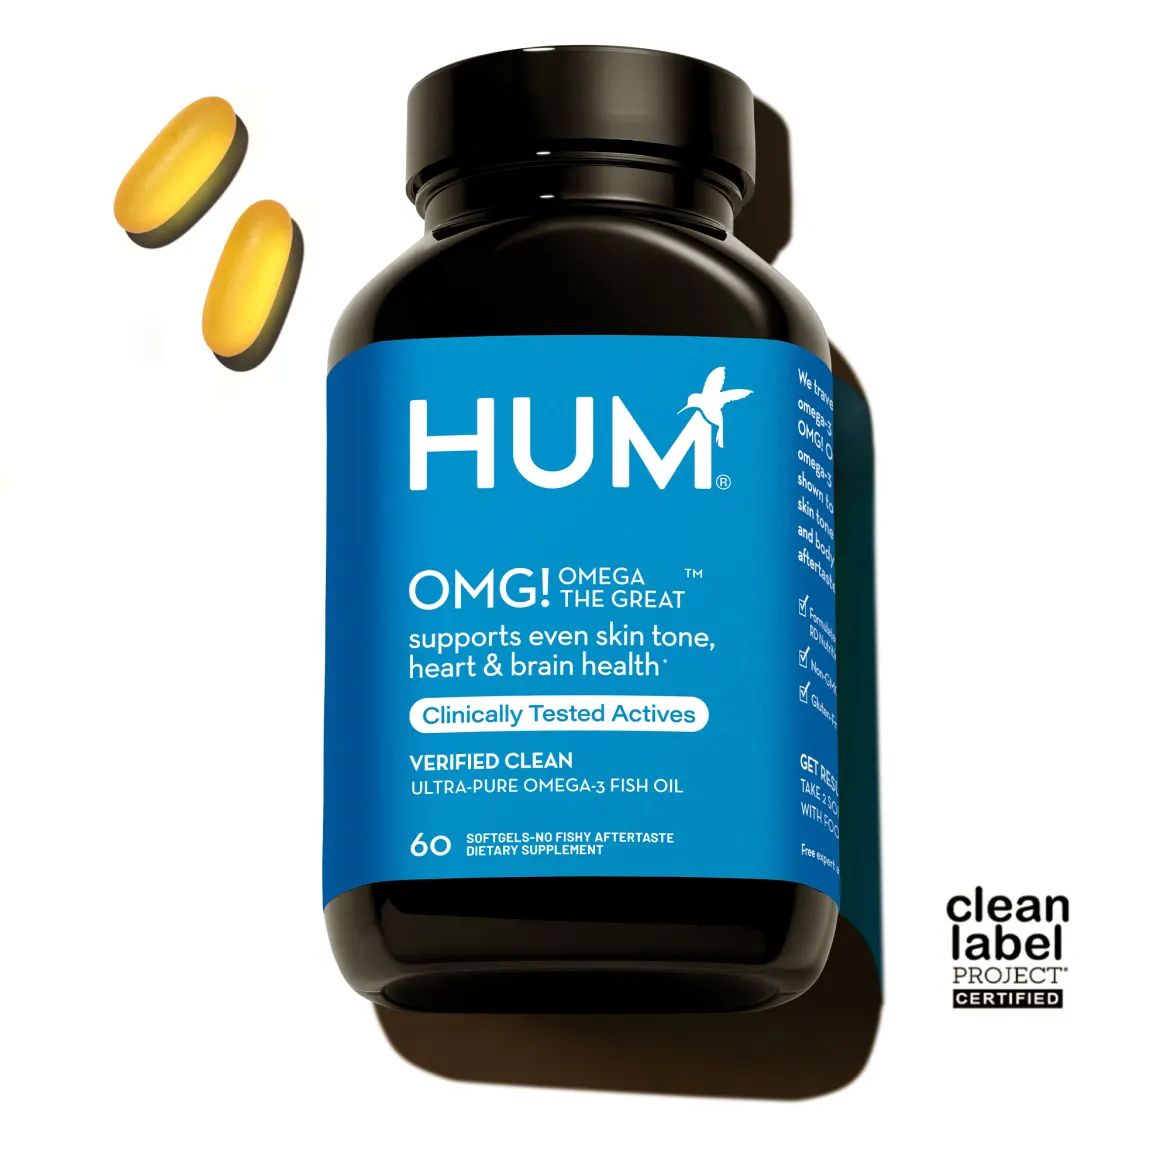 OMG! Omega the Great™ | HUM Nutrition